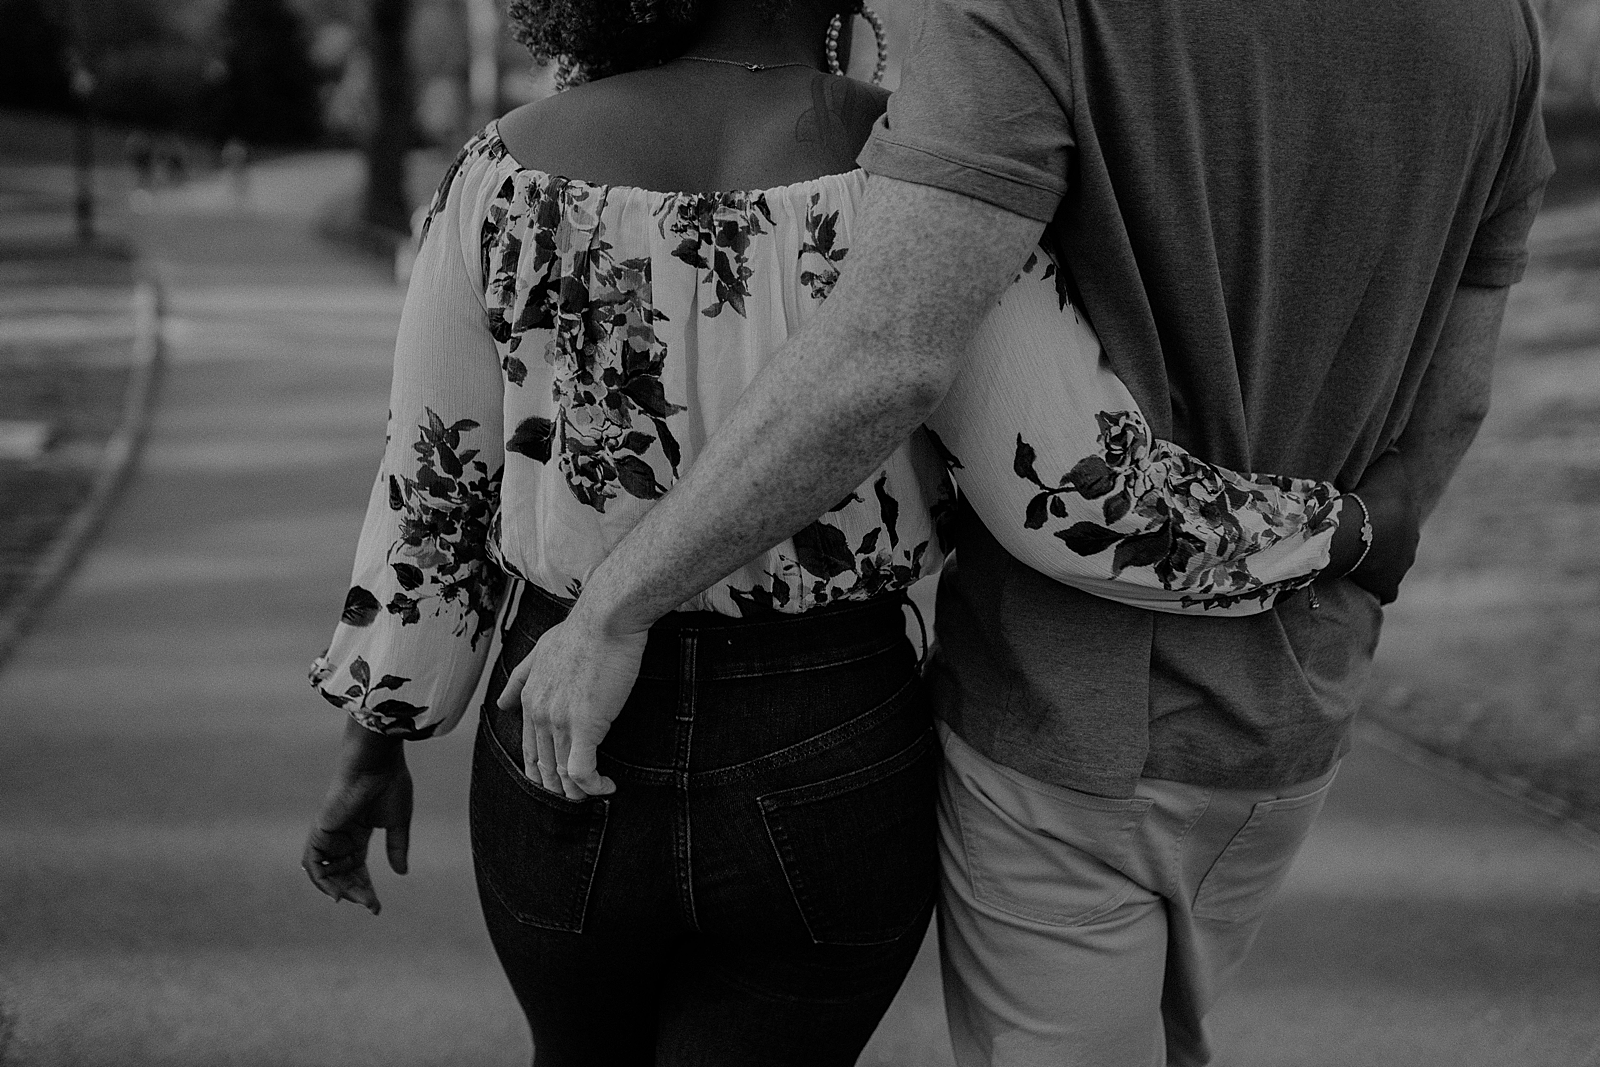 B&W Couple with arms around each other walking on sidewalk